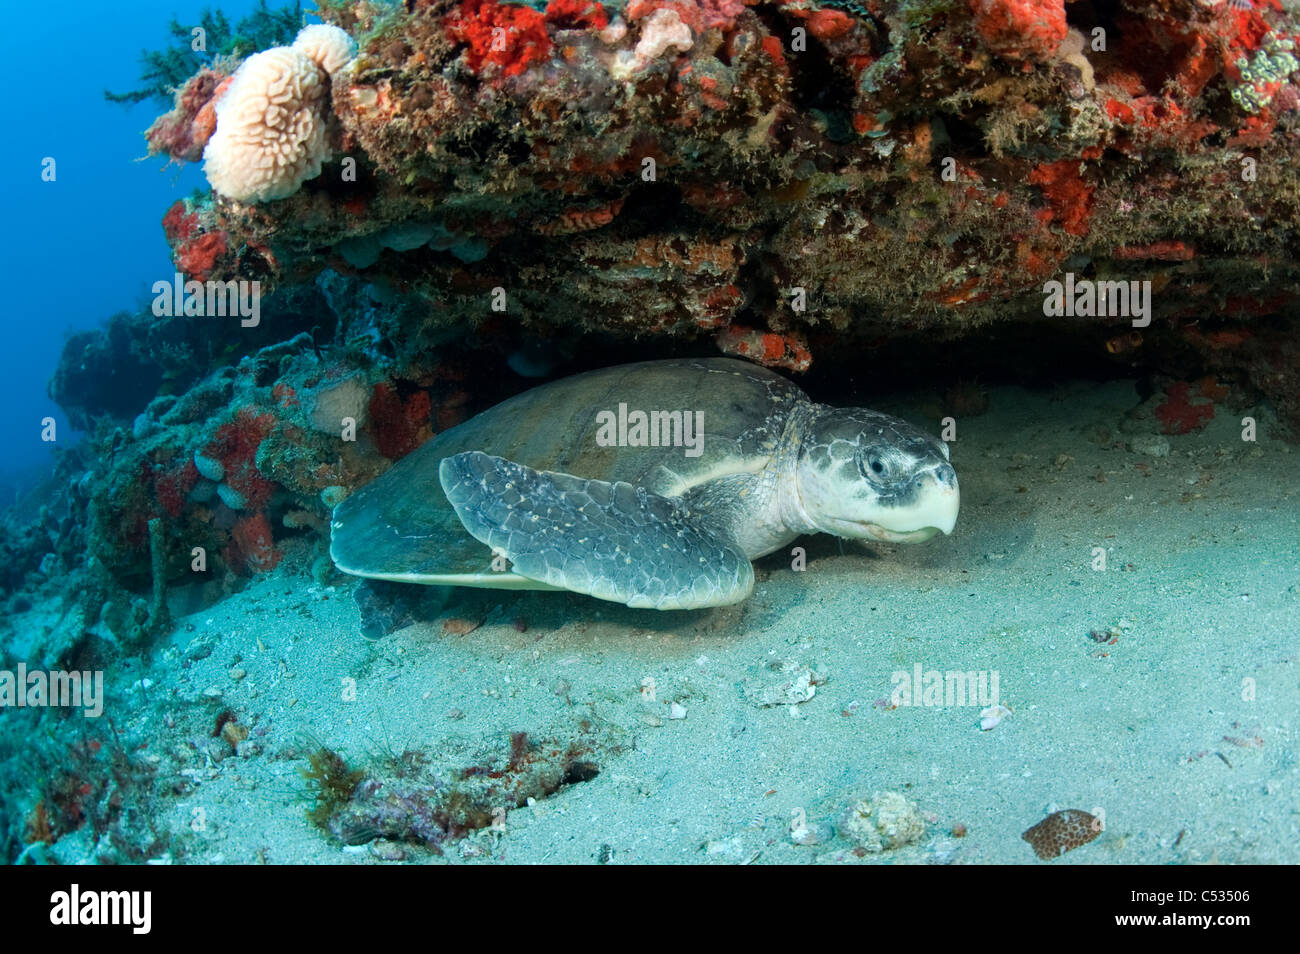 Kemp's Ridley Sea Turtle, (Lepidochelys kempii), photographed underwater in northern Palm Beach, Florida. HIghly endangered. Stock Photo